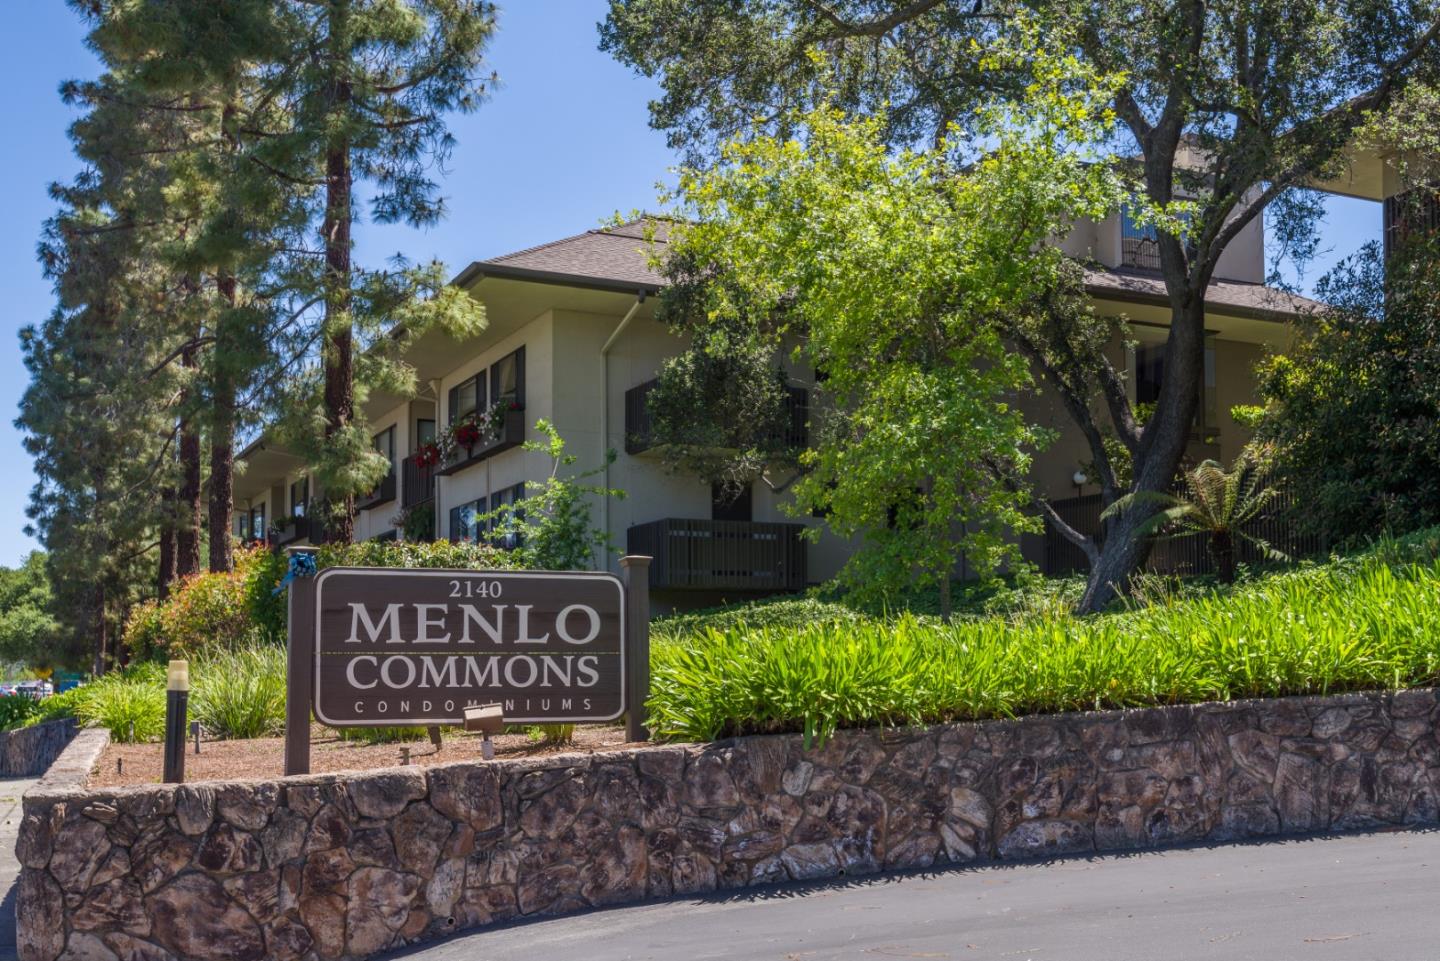 Rarely available 2 bedroom, 2 bathroom end unit at Menlo Commons-private and quiet, this condo is on the first floor (no stairs) and faces the inner courtyard-open floor plan for easy living life style-updated kitchen and bathrooms for your added comfort-private balcony off primary bedroom for early morning coffee-washer/dryer in unit for convenience-Menlo Commons is an active adult community (1 person must be 55)-relax by the pool, work out in the exercise room, join friends in the clubhouse-located near Stanford Hospital, Stanford University, Stanford Shopping Center, Sharon Heights Shopping Center-easy access to I-280